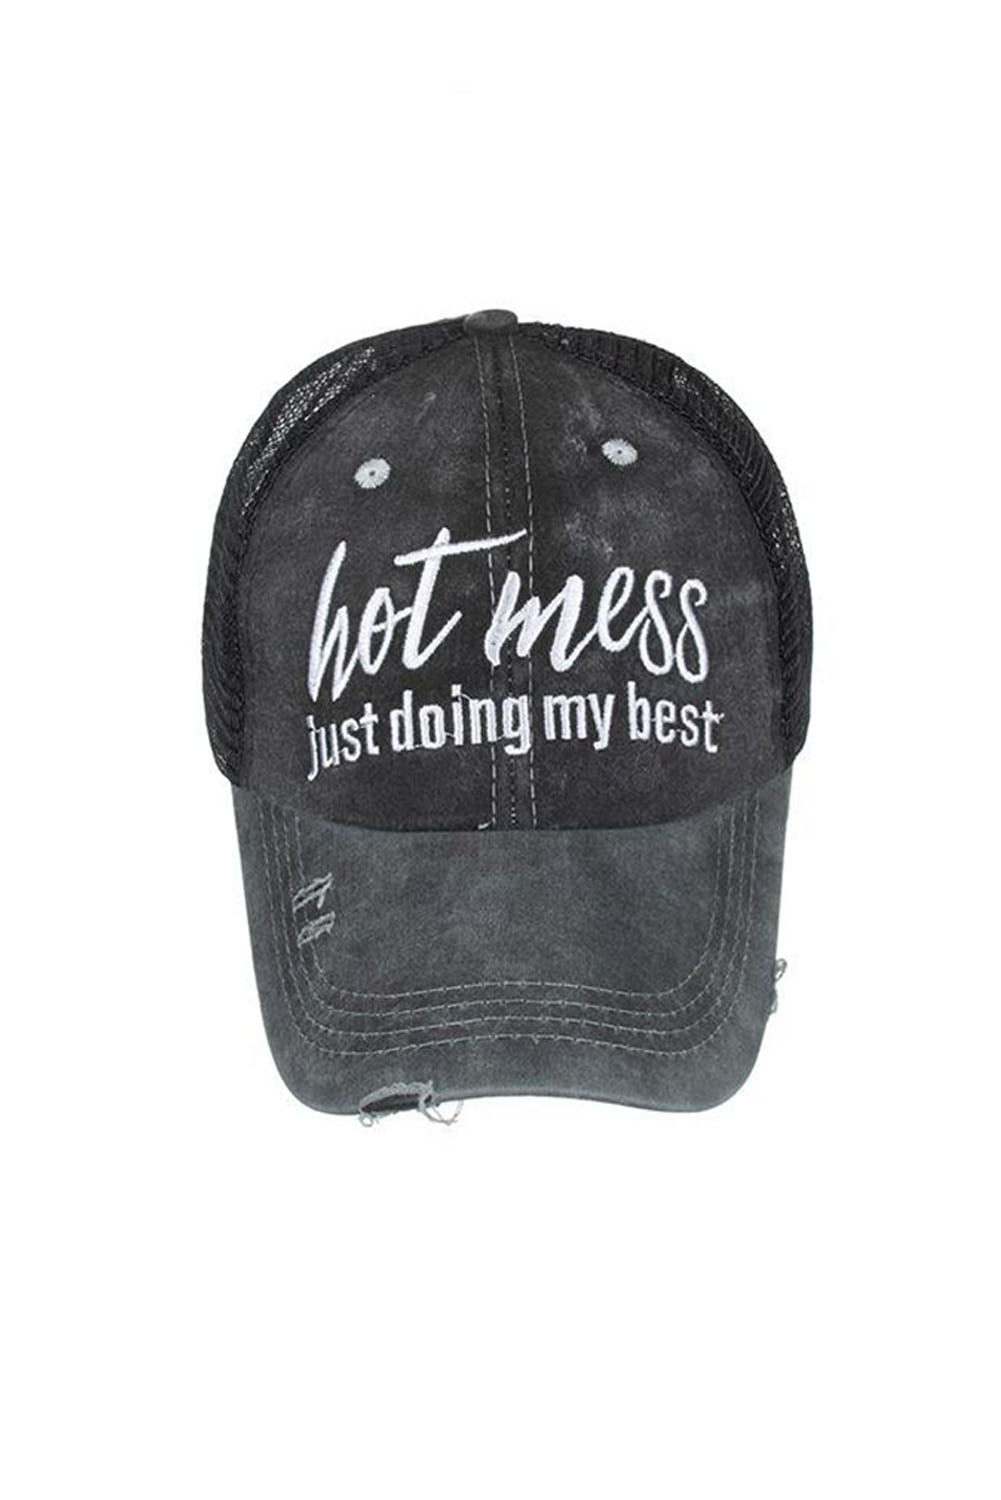 Hot Mess Doing My Best Embroidered Mesh Baseball Cap Hats & Caps JT's Designer Fashion